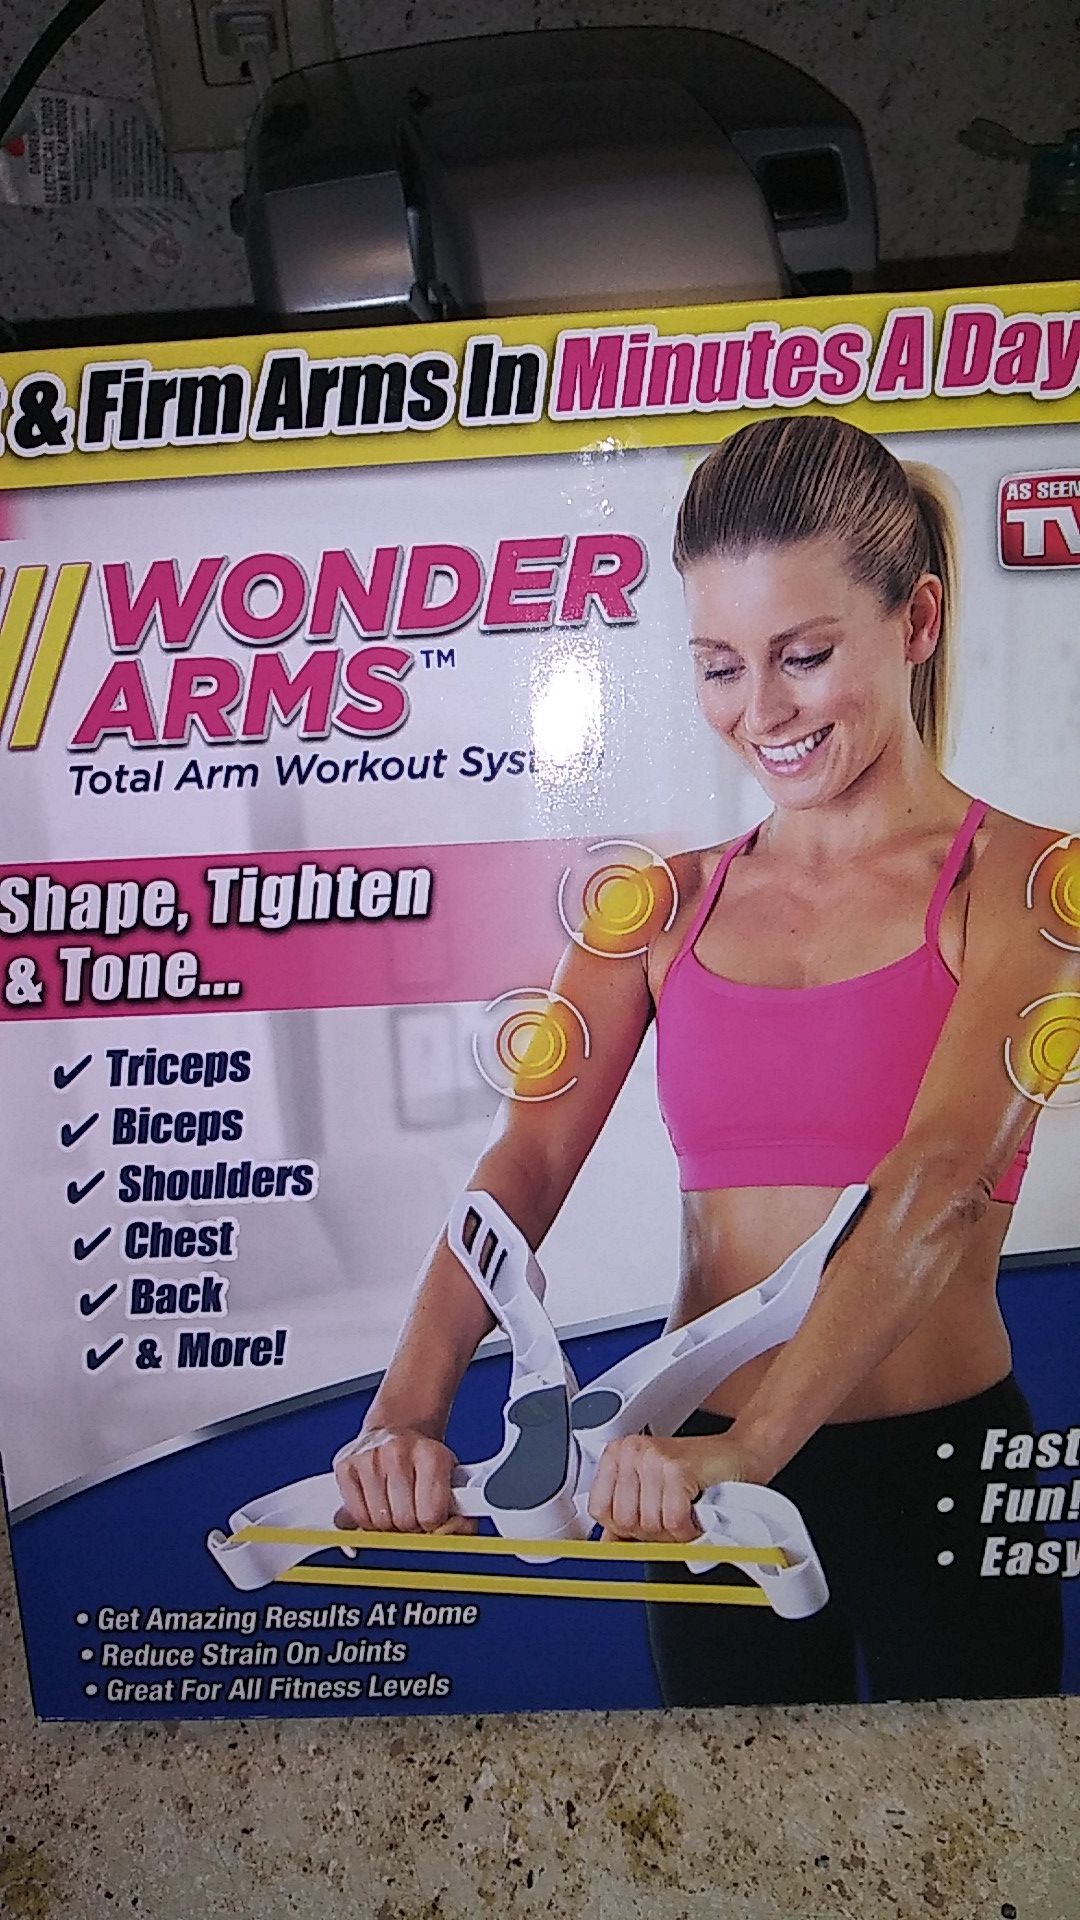 As Seen On TV Wonder arms total arm workout system